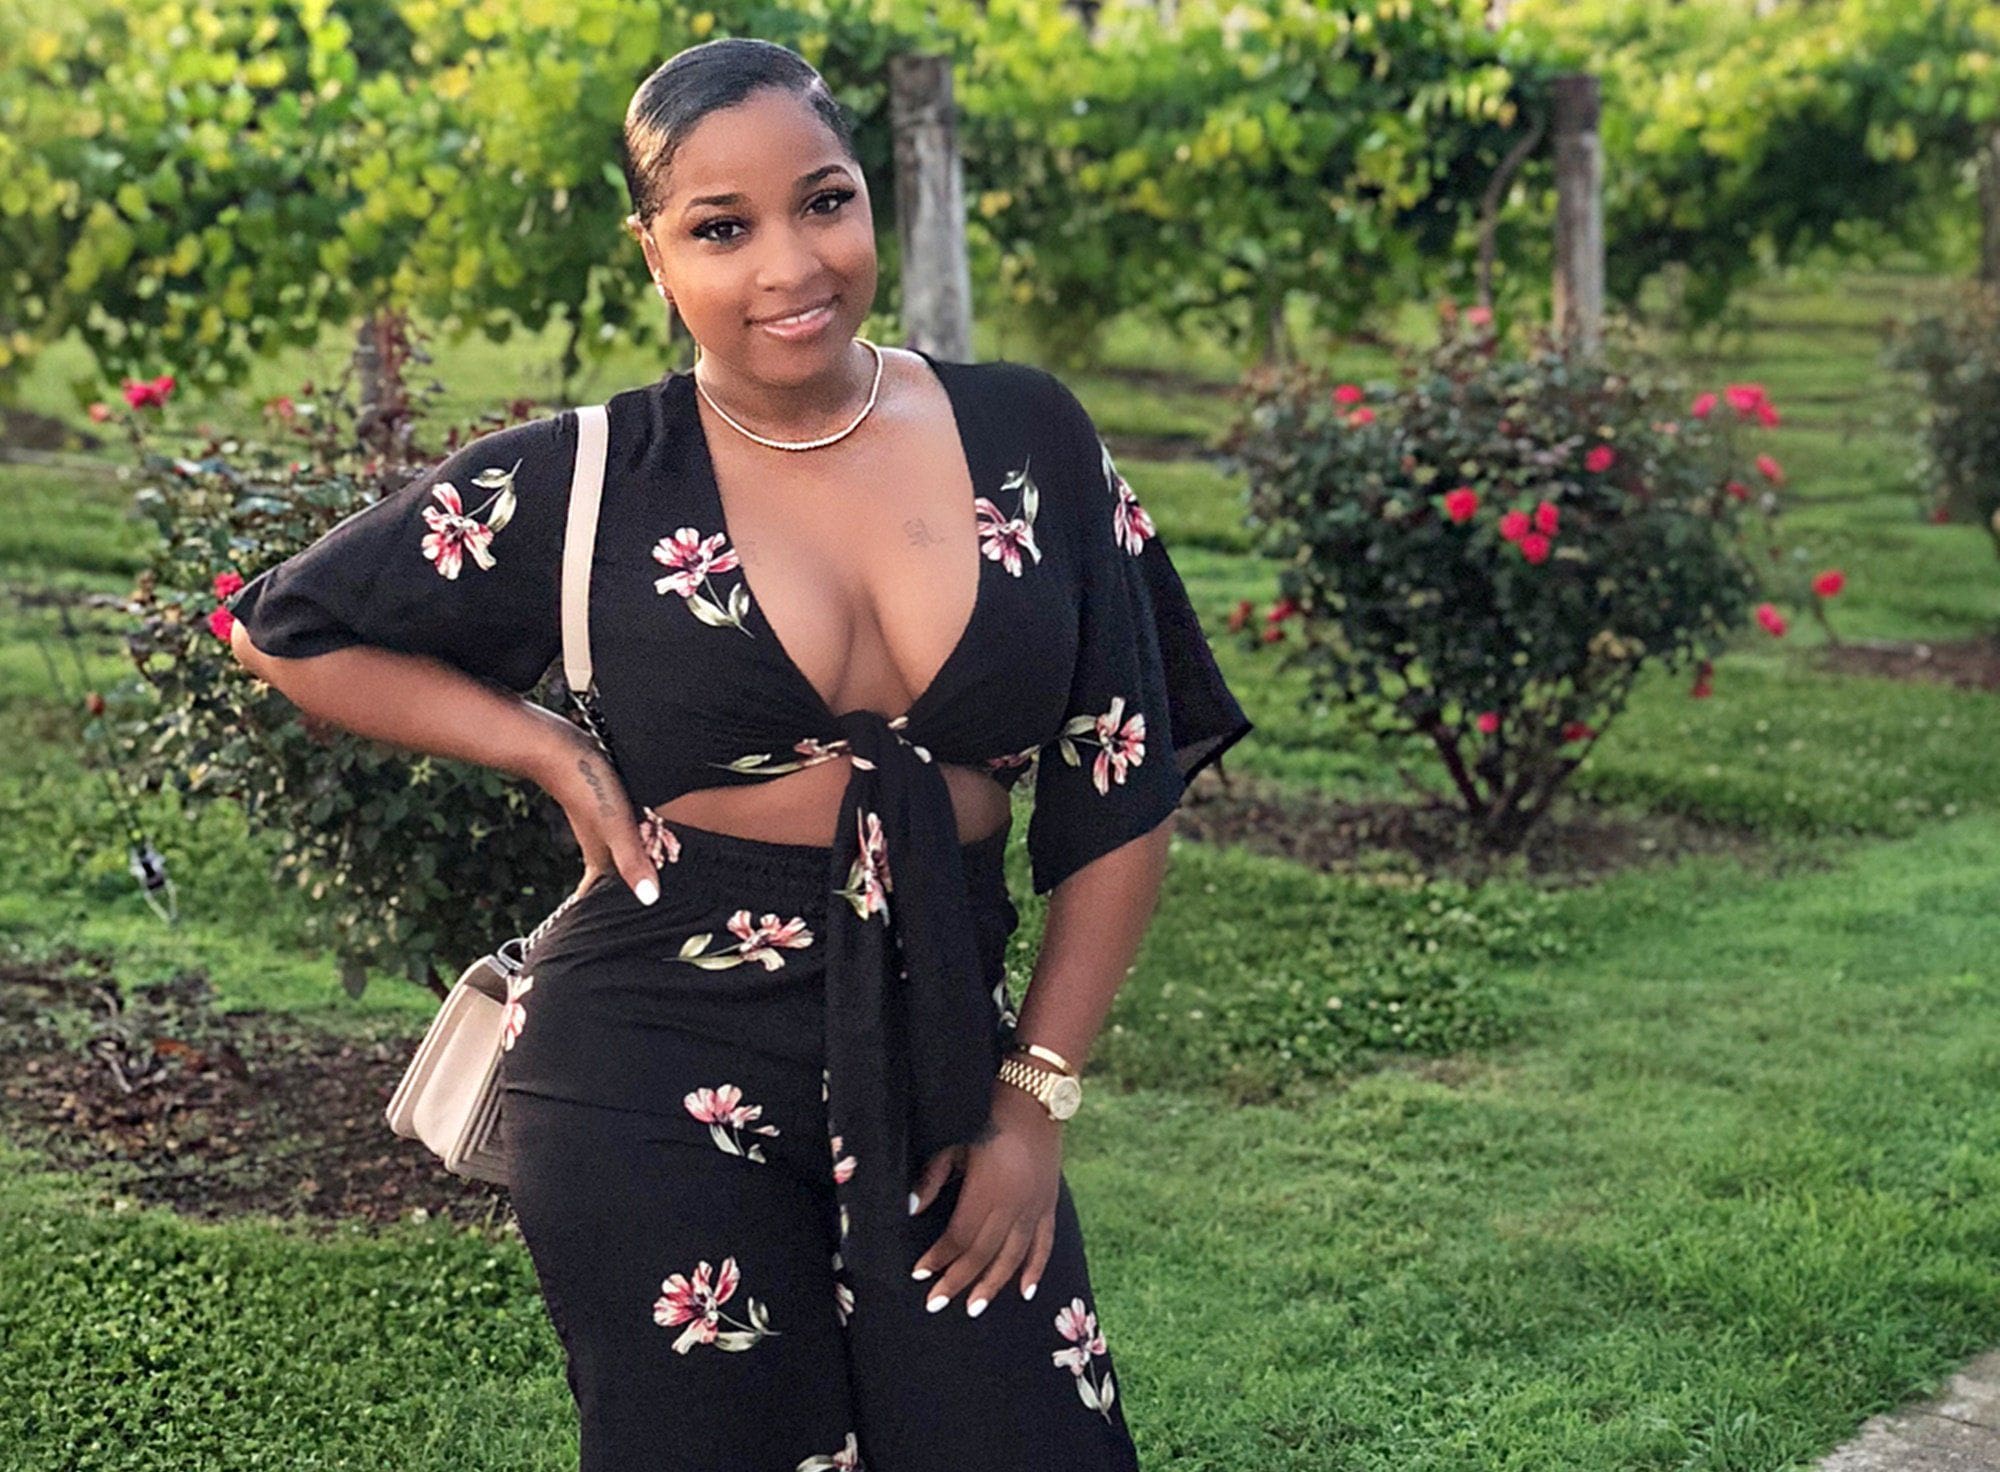 Toya Wright And Robert Rushing Are Training Like There's No Tomorrow And Become Couple Goals - Watch The Clips